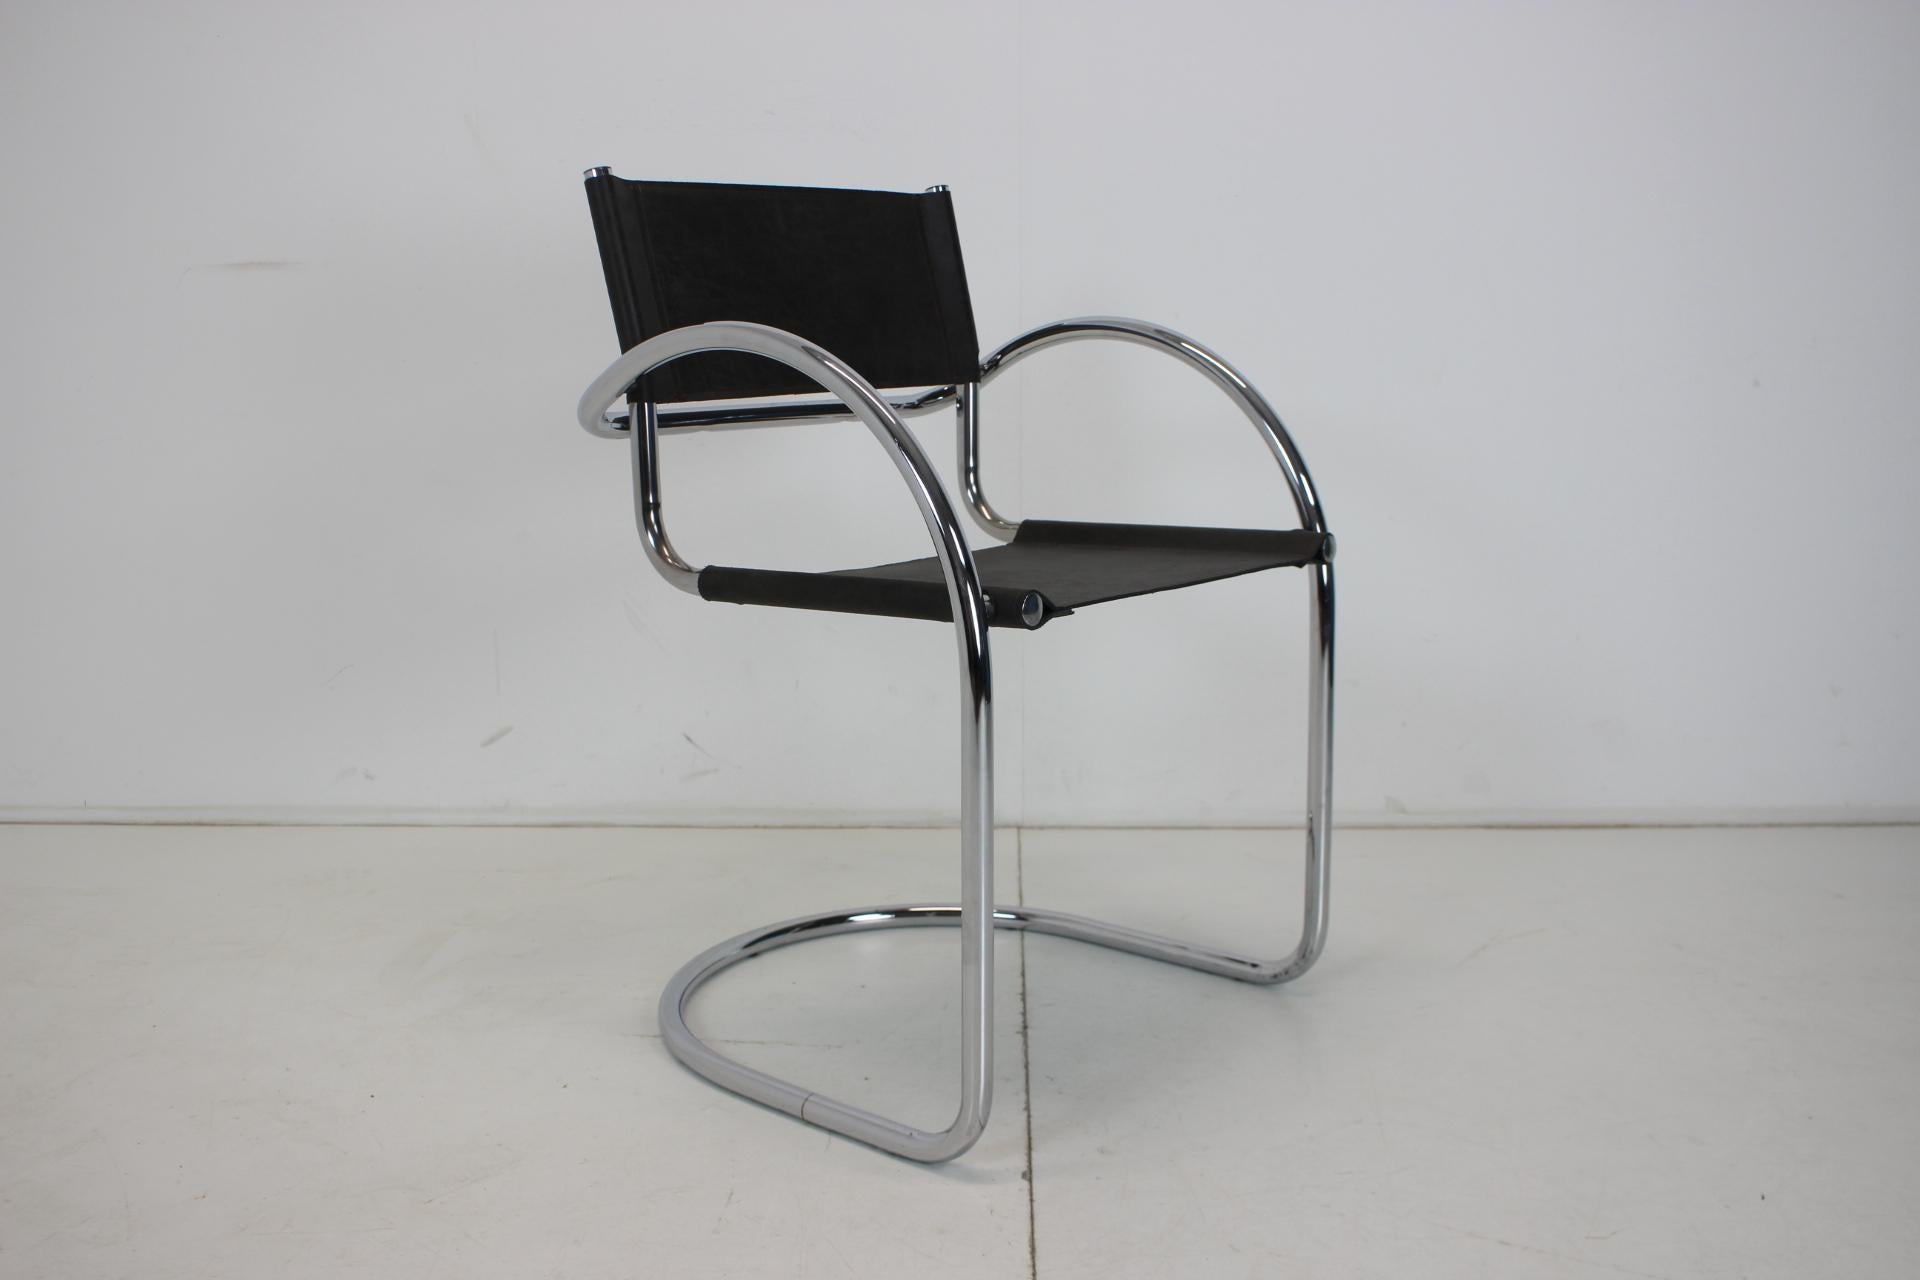 Made in Czechoslovakia
Made of Chrome,Leather
Two pieces in stock
Seat Height 45cm
New Leather
Chrome has with aged patina
Good original condition.